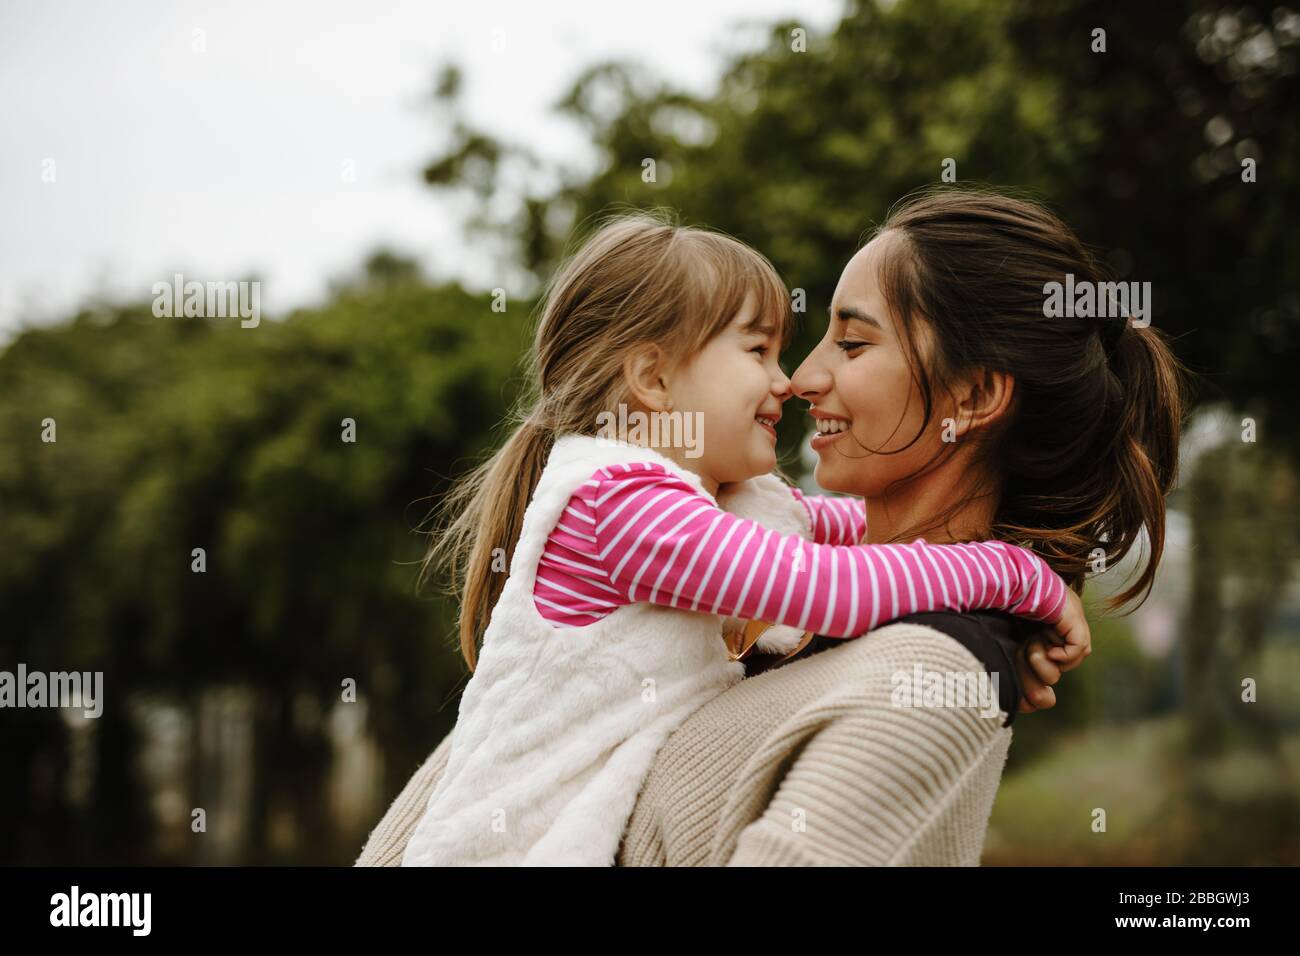 Side view of woman carrying a small girl and smiling outdoors. Babysitter with a girl at the park. Stock Photo